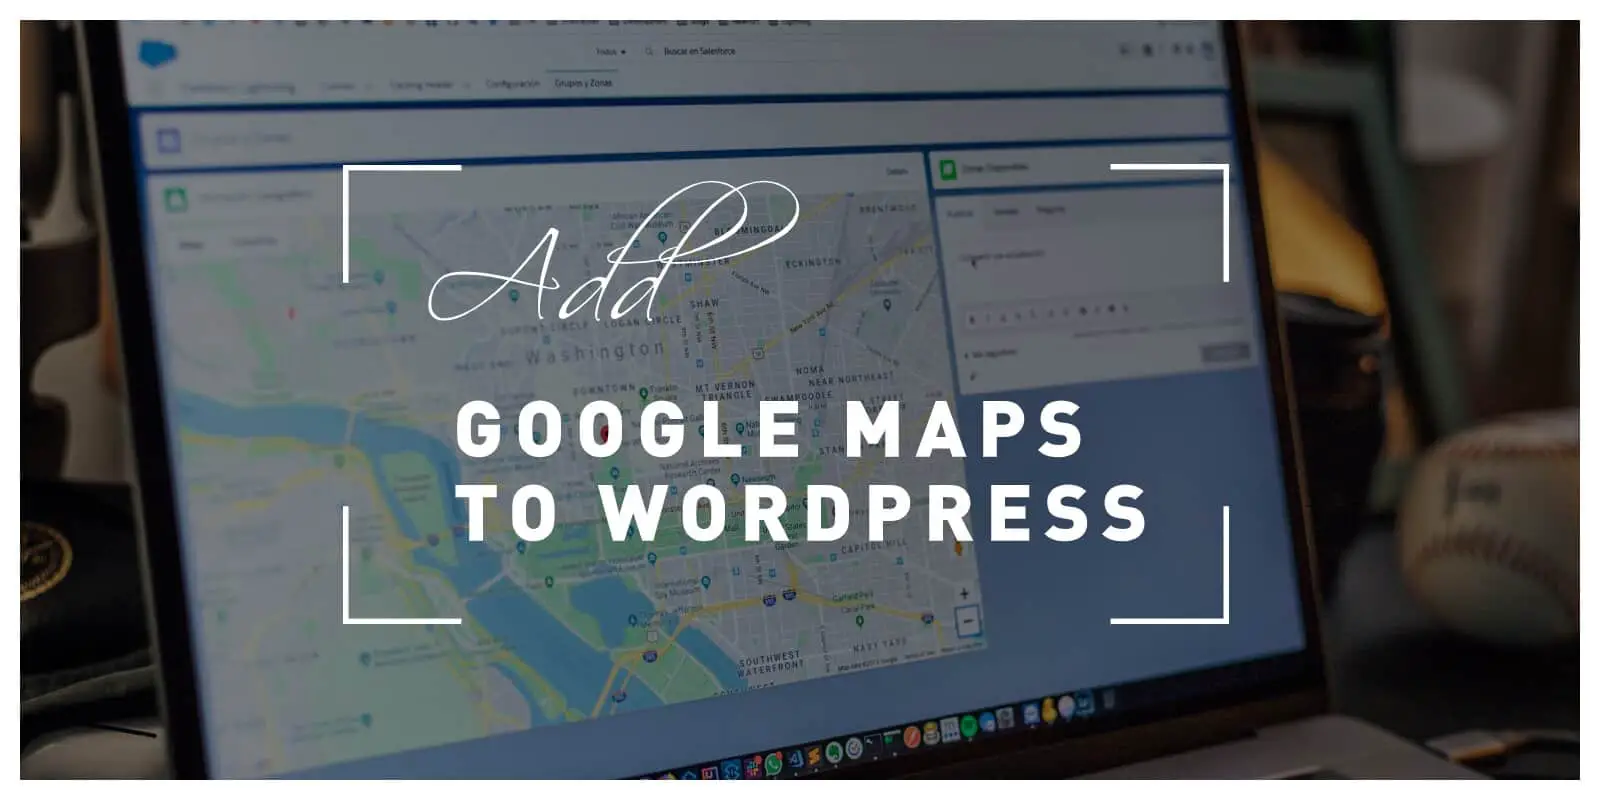 How to Quickly Add Google Maps to Wordpress